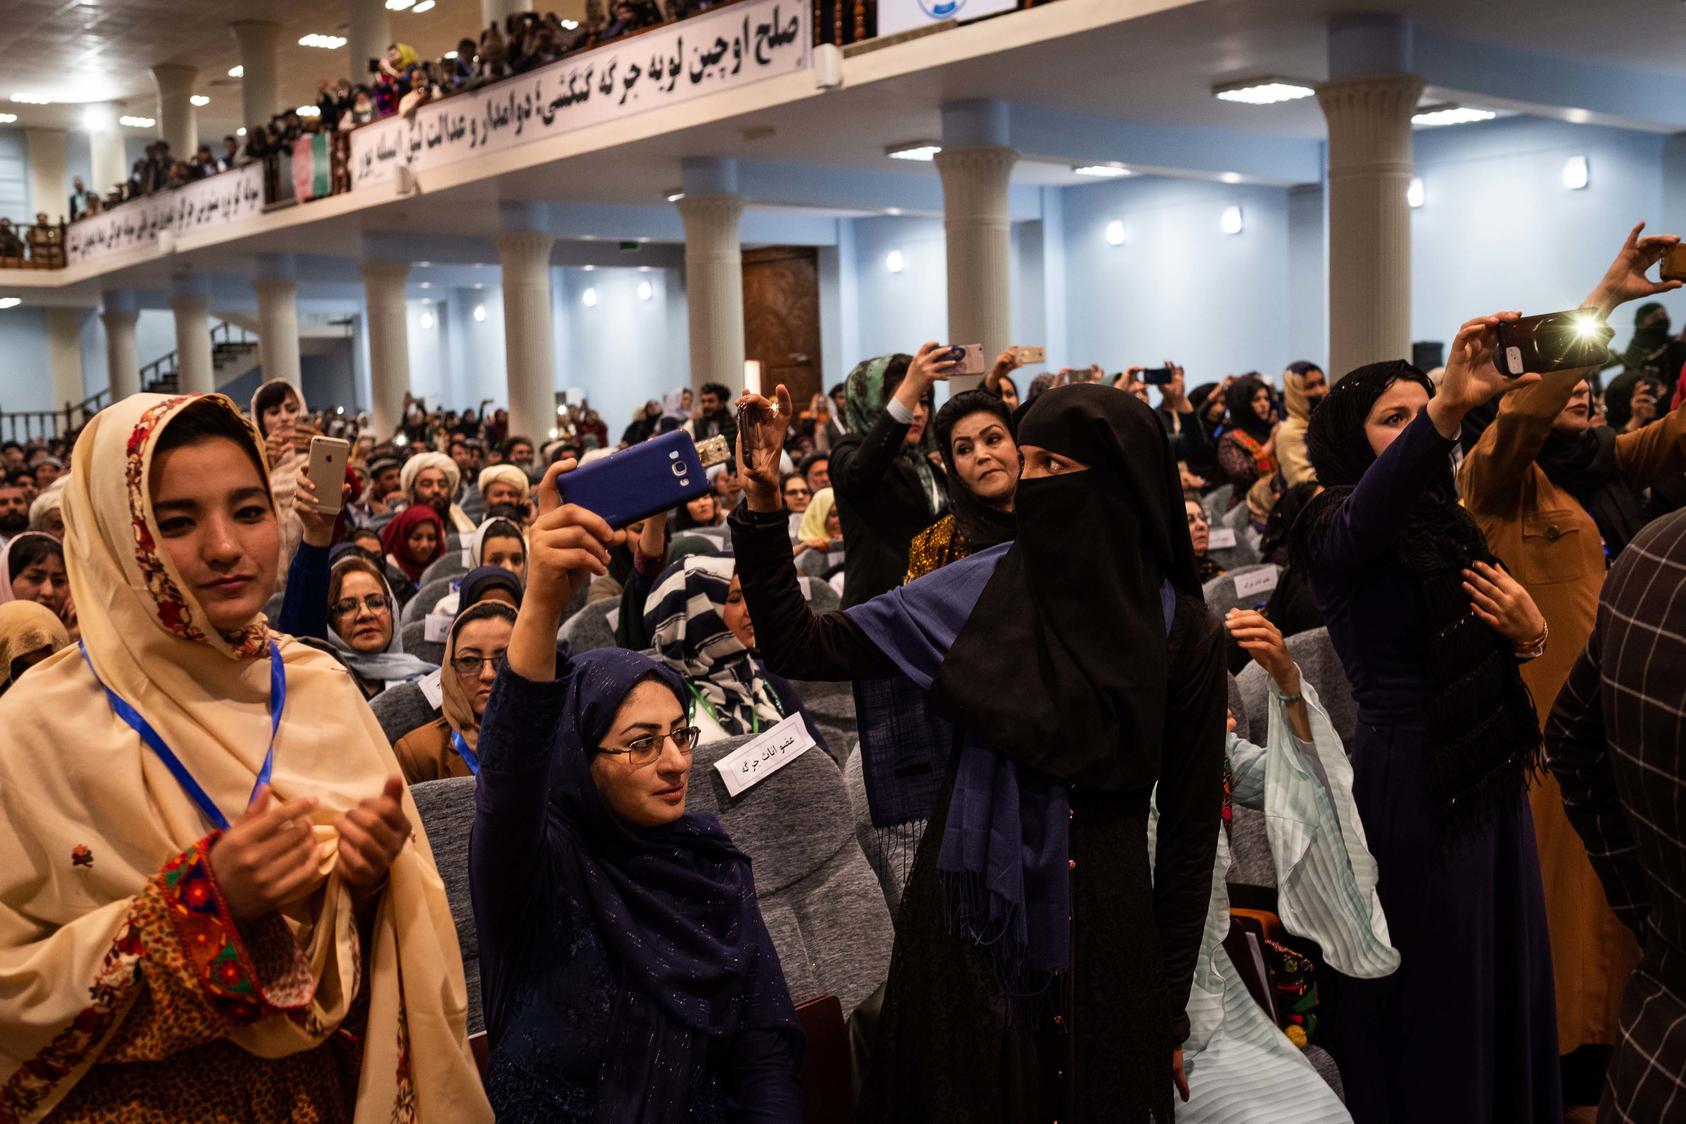 The opening session of a 2019 tribal assembly in Kabul, Afghanistan. Many Afghan women seized on the freedoms that emerged after the American invasion and collapse of the Taliban government in 2001. They do not want to go back to the terms of Taliban rule. (Jim Huylebroek/The New York Times)